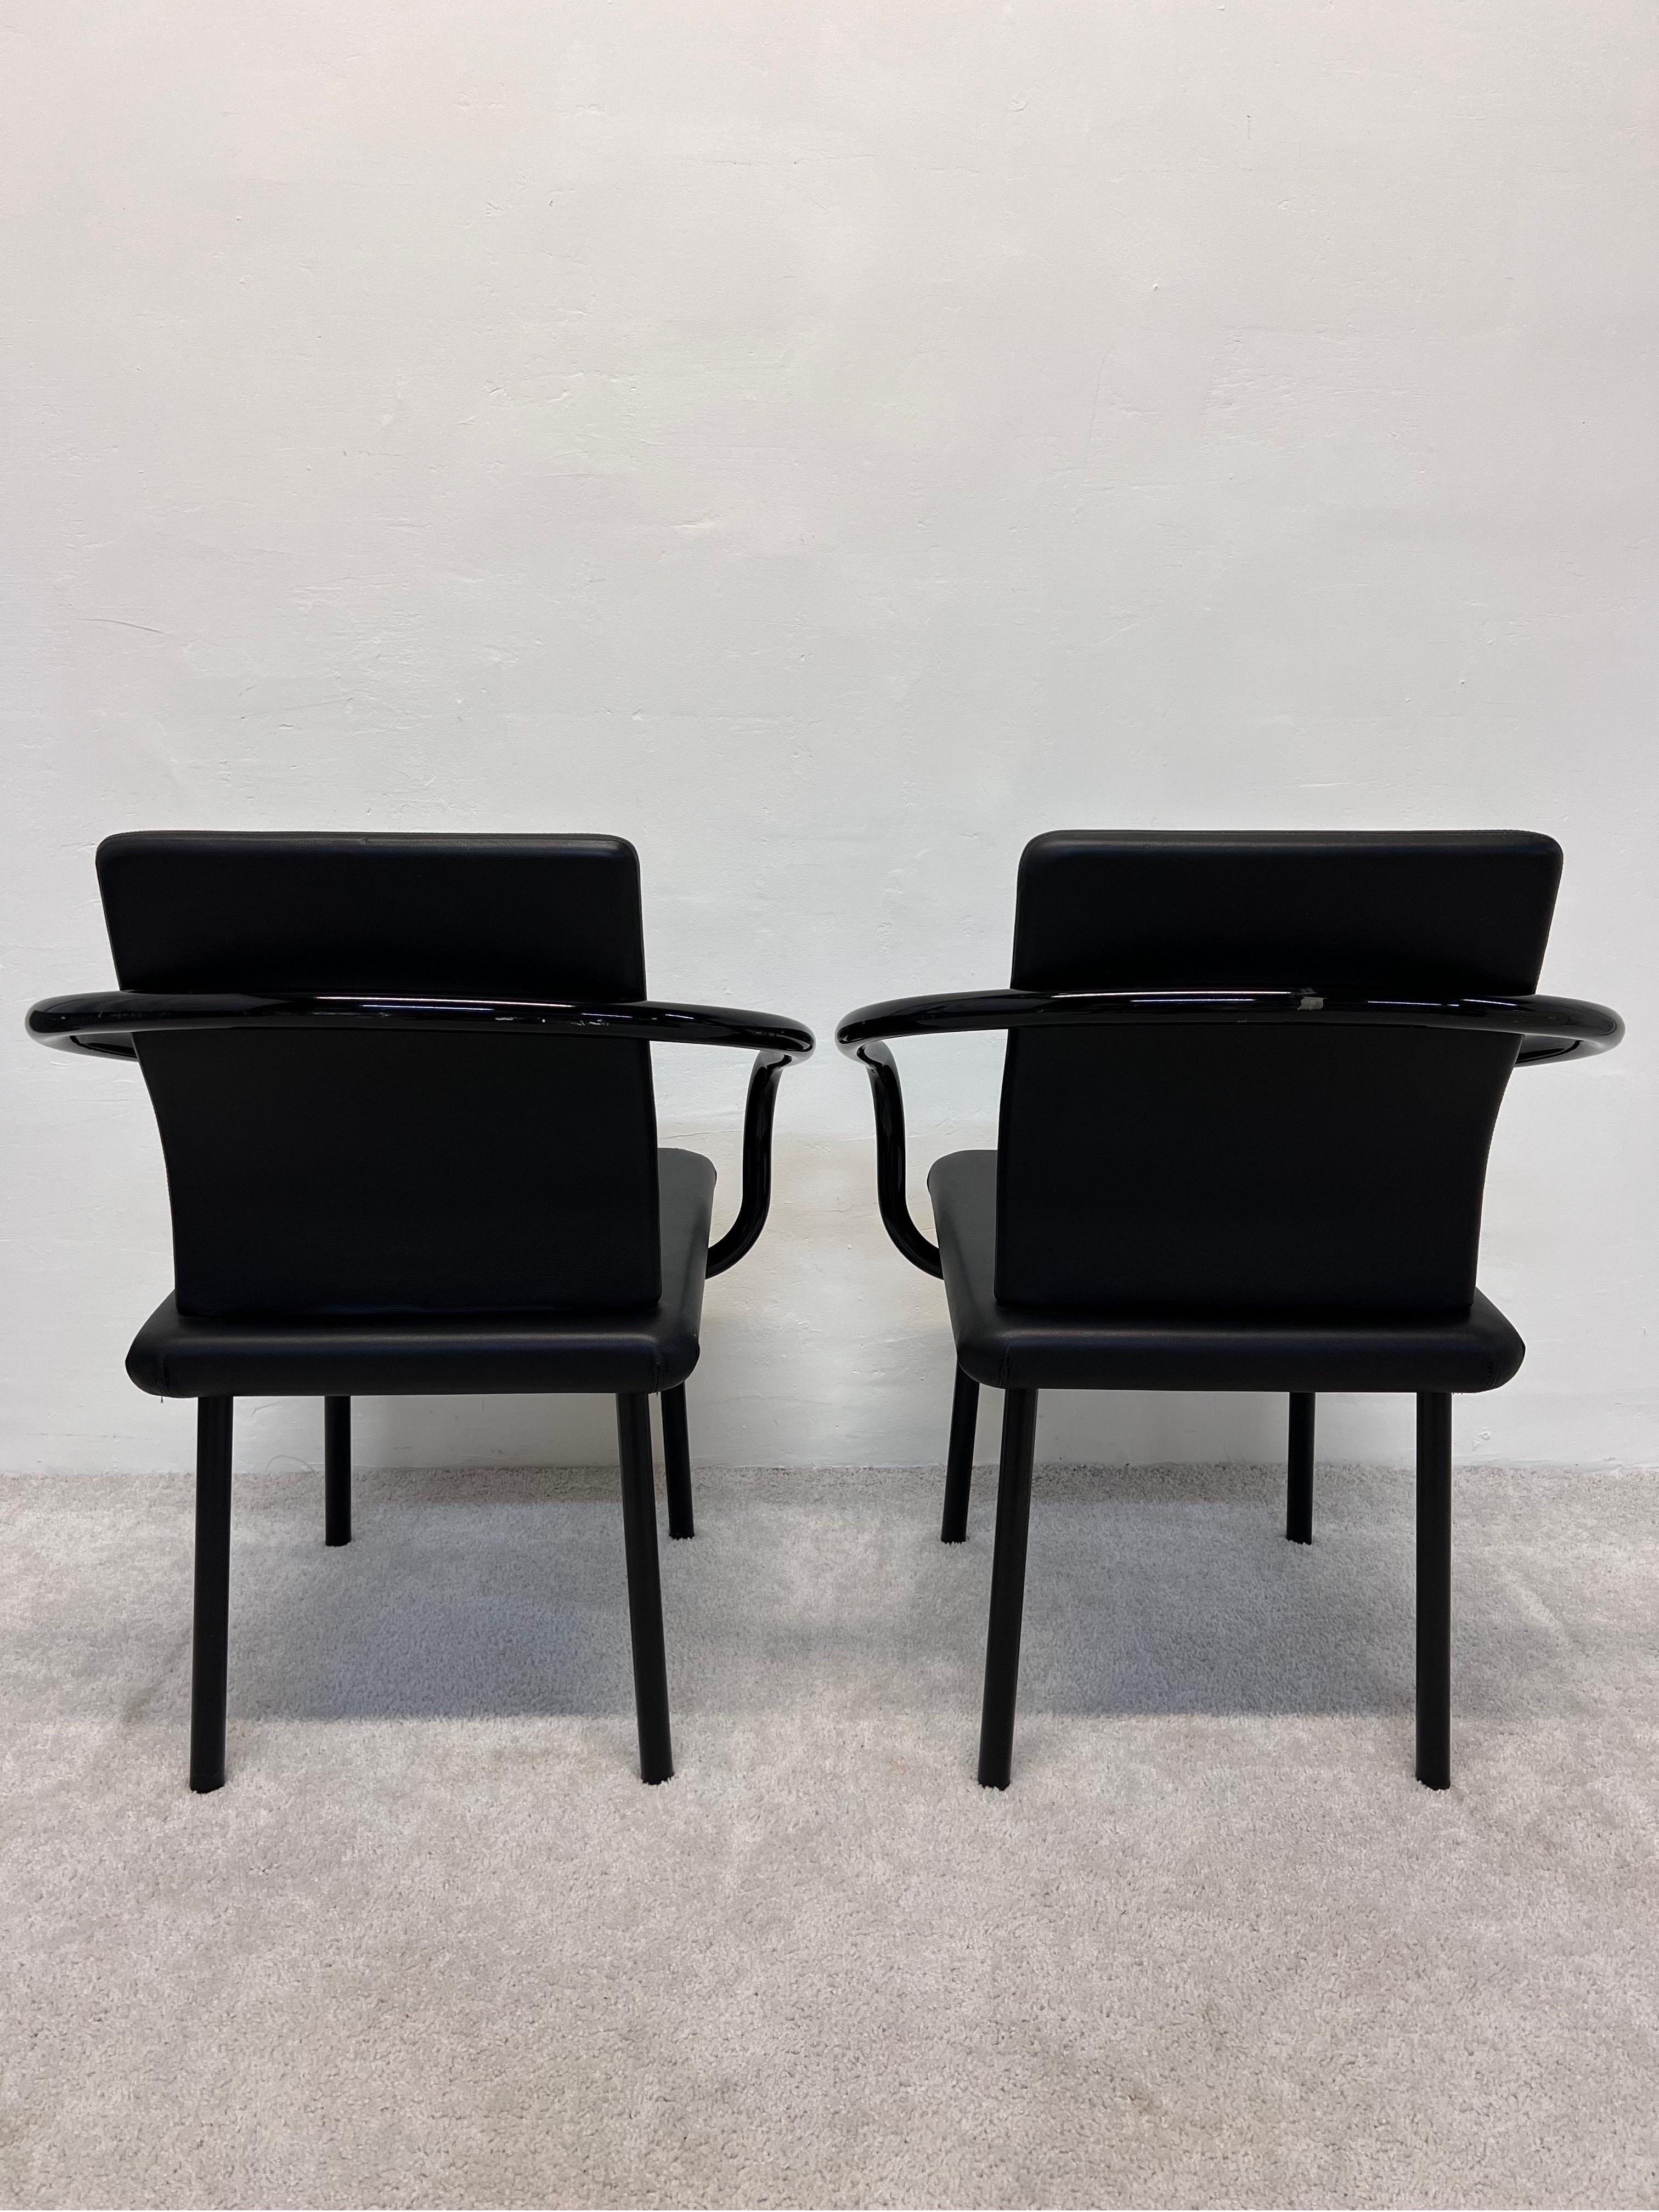 Italian Ettore Sottsass “Mandarin” Black Eco Leather Dining Chairs for Knoll, a Pair For Sale